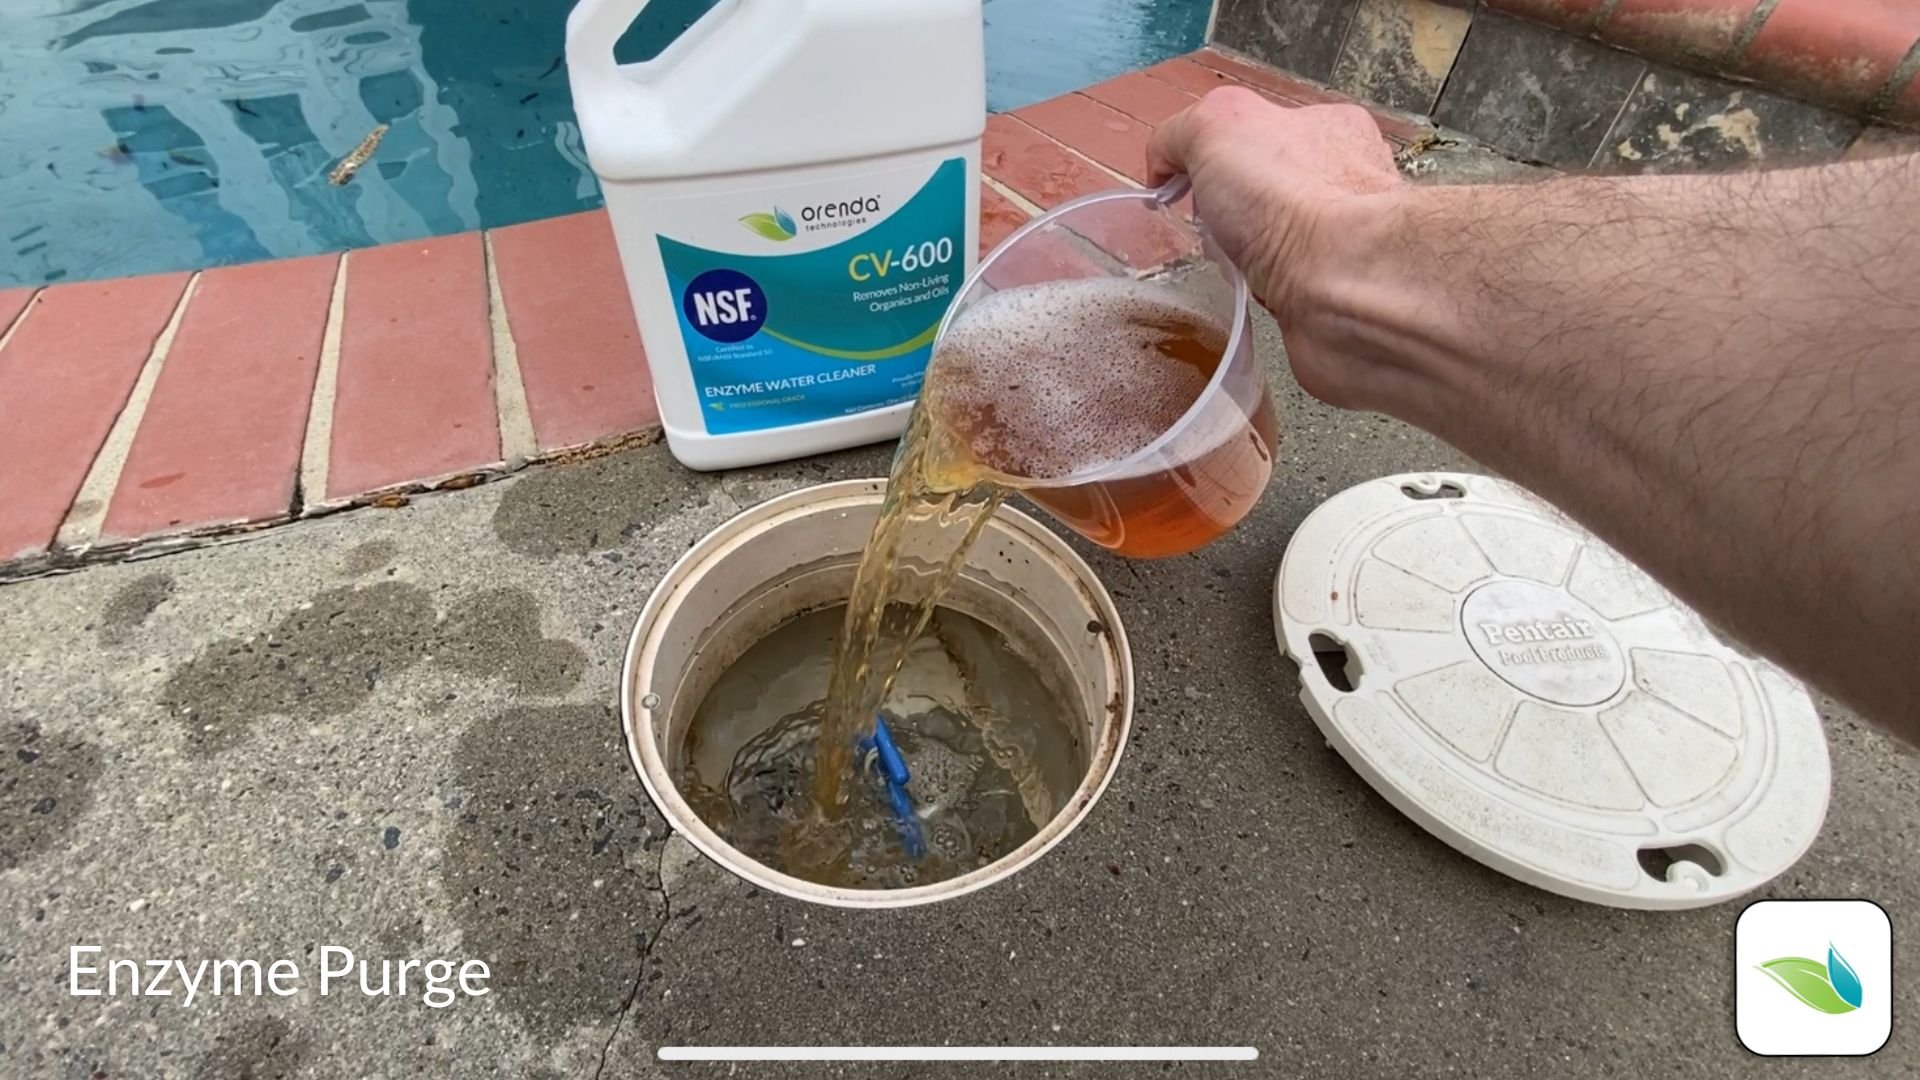 Orenda purge, CV-600 enzymes into swimming pool skimmer, remove non-living organics and hydrocarbons, water clarity